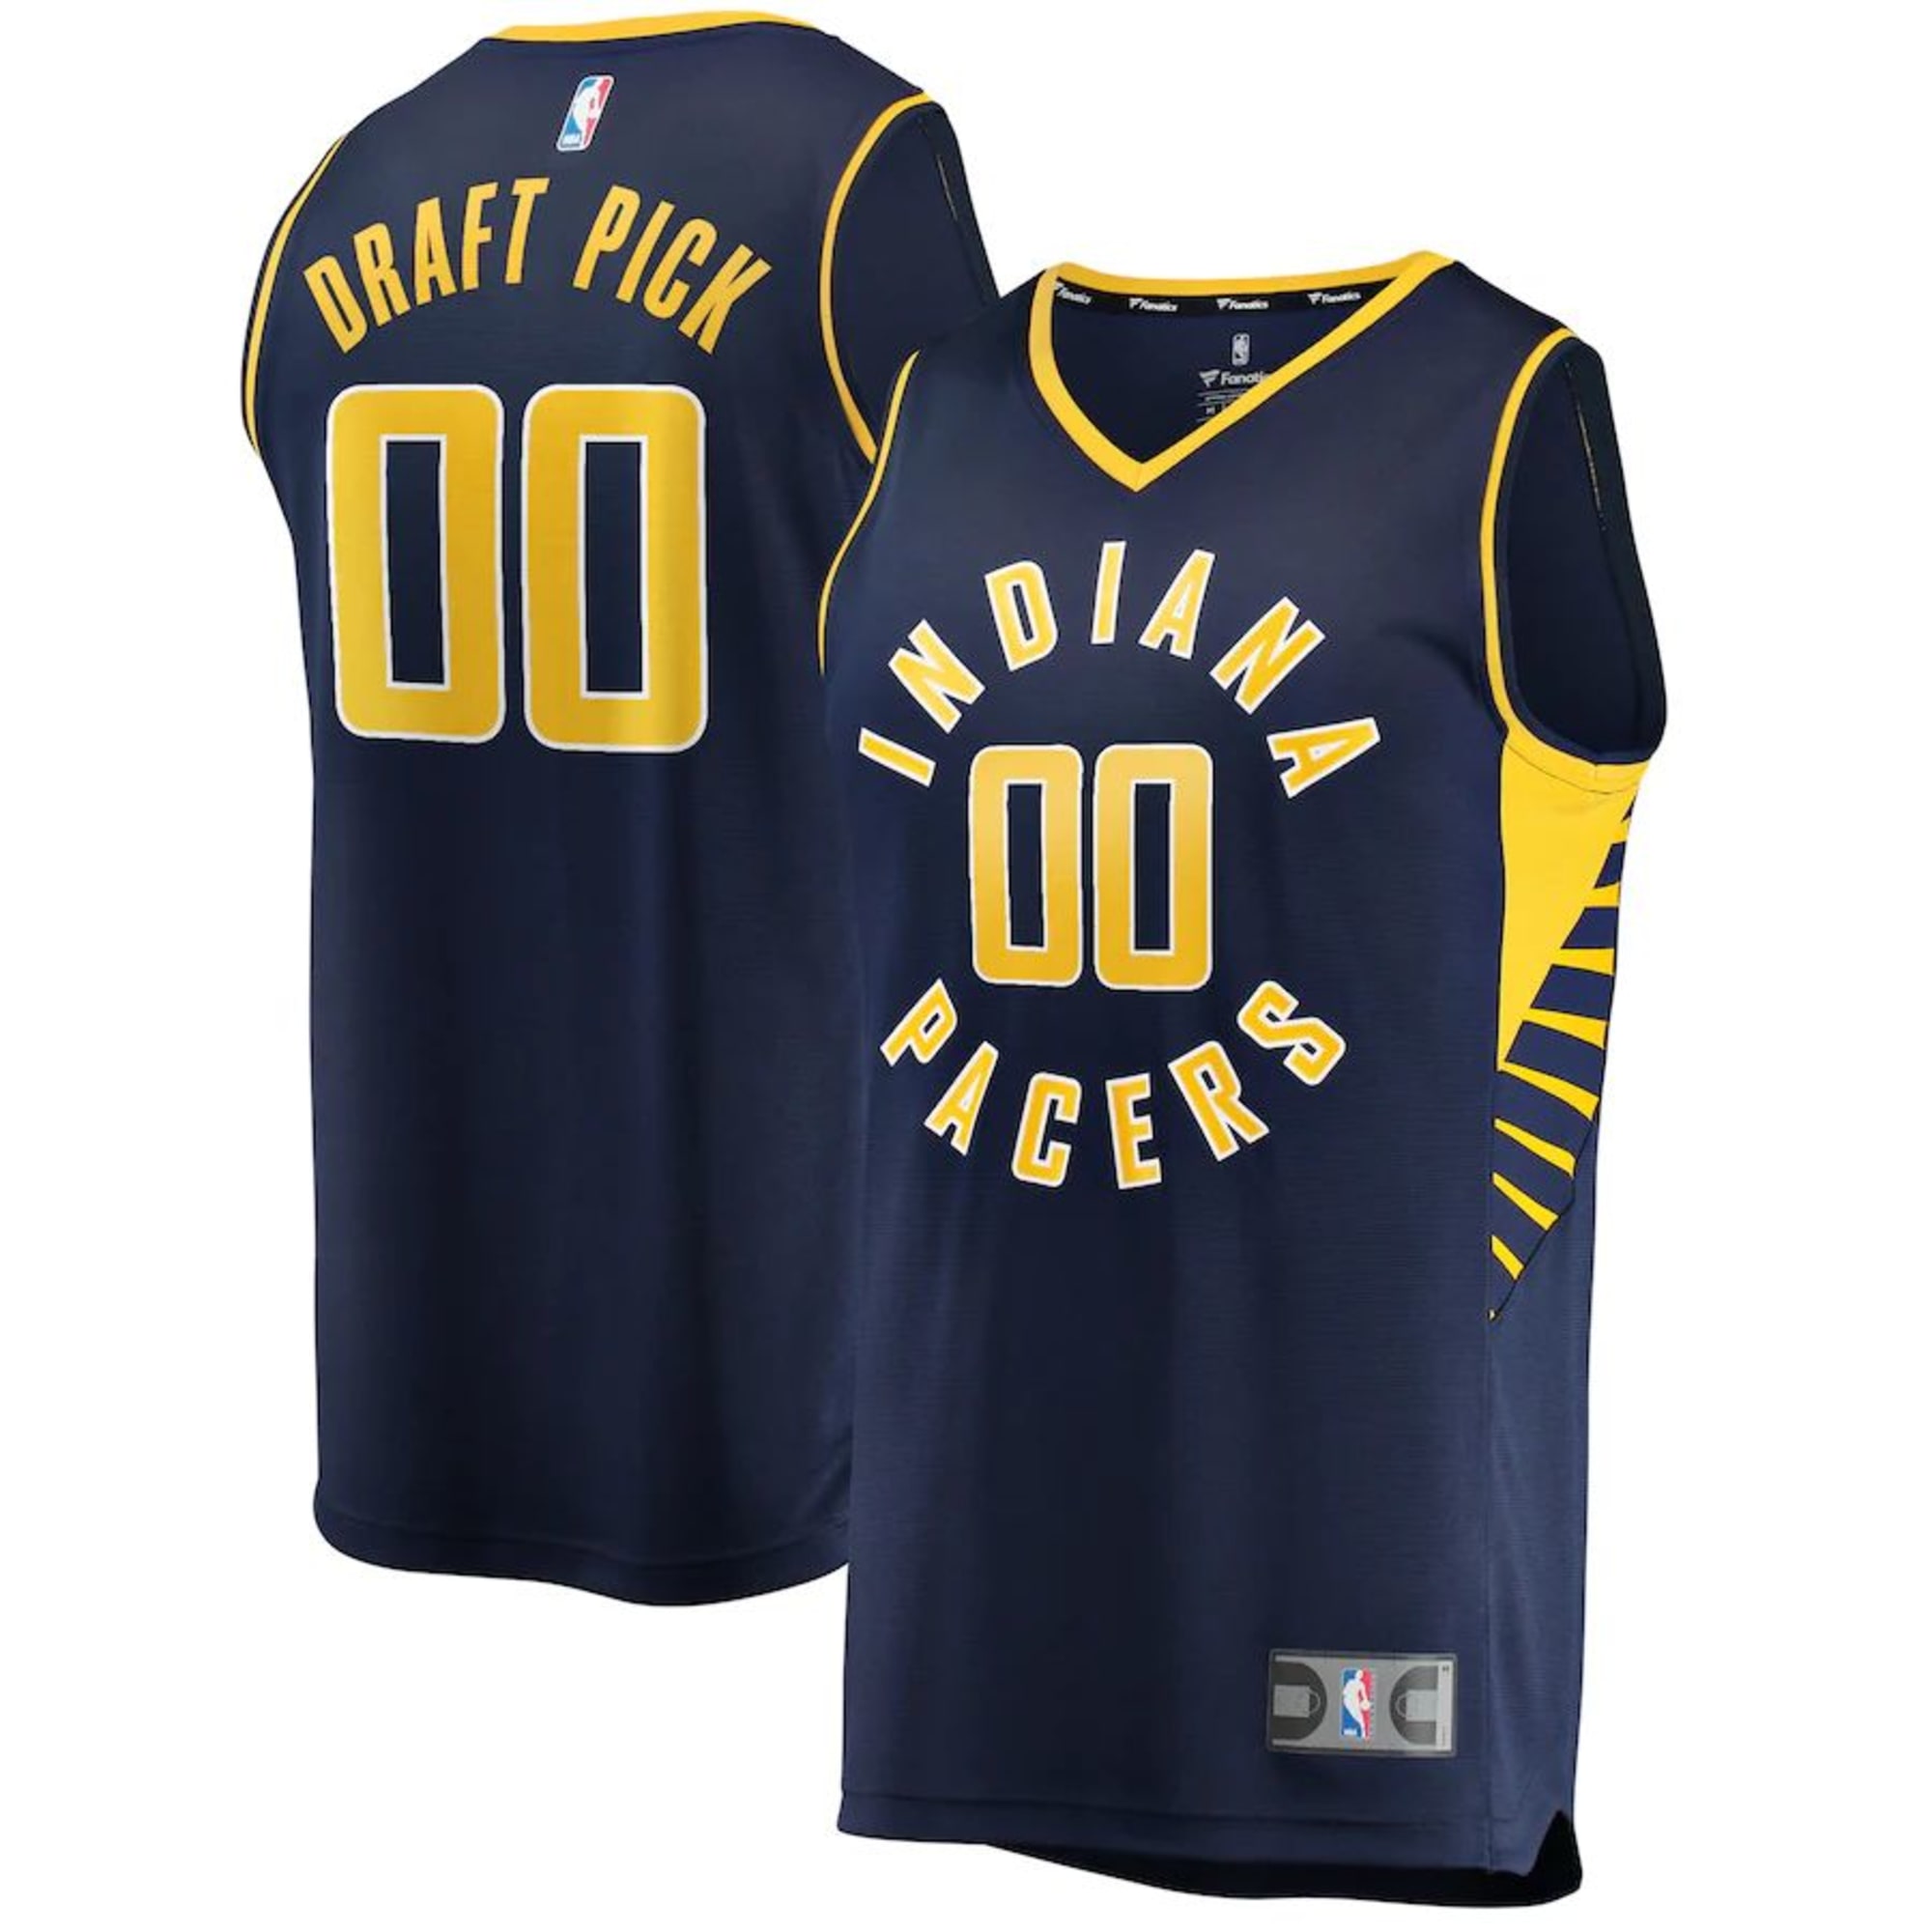 NBA Draft Get your Indiana Pacers Bennedict Mathurin gear now